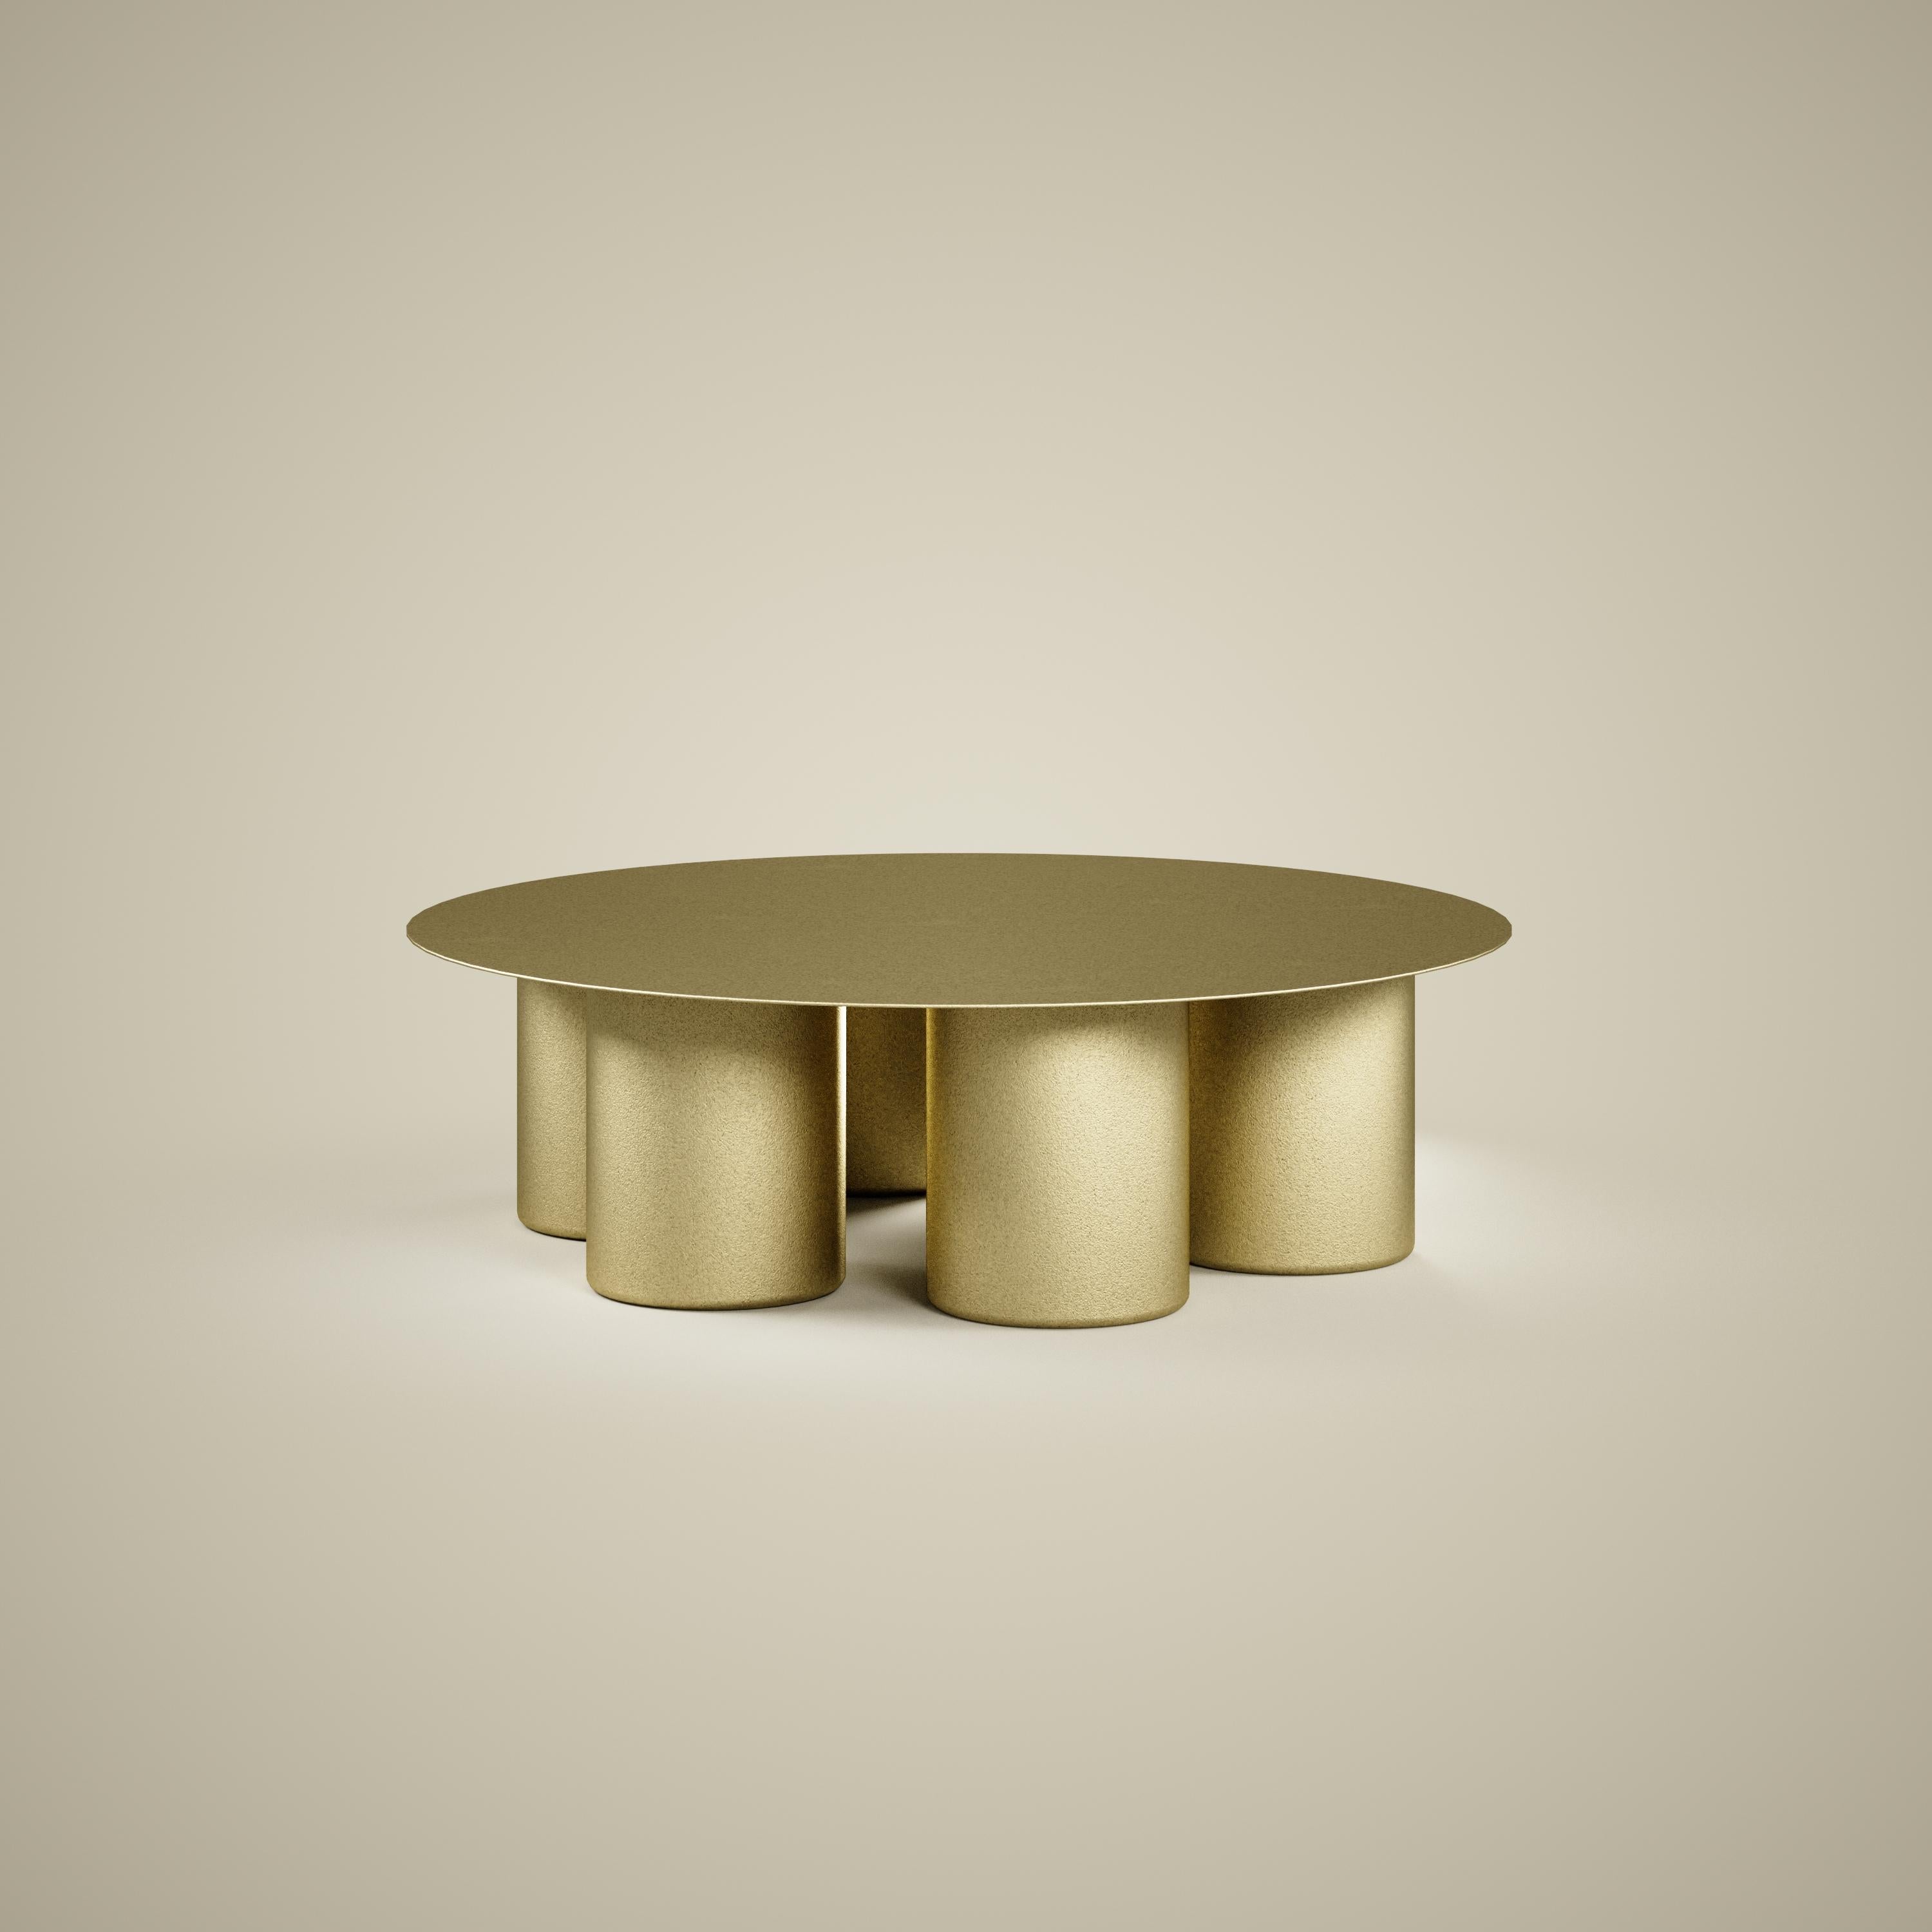 High end round Stainless steel coffee table designed by Vincent Mazenauer. The table can be lacquered in all colors (white, black, grey, gold, yellow, red, yellow, blue, etc). 
That table came from the Element coffee table collection by Vincent